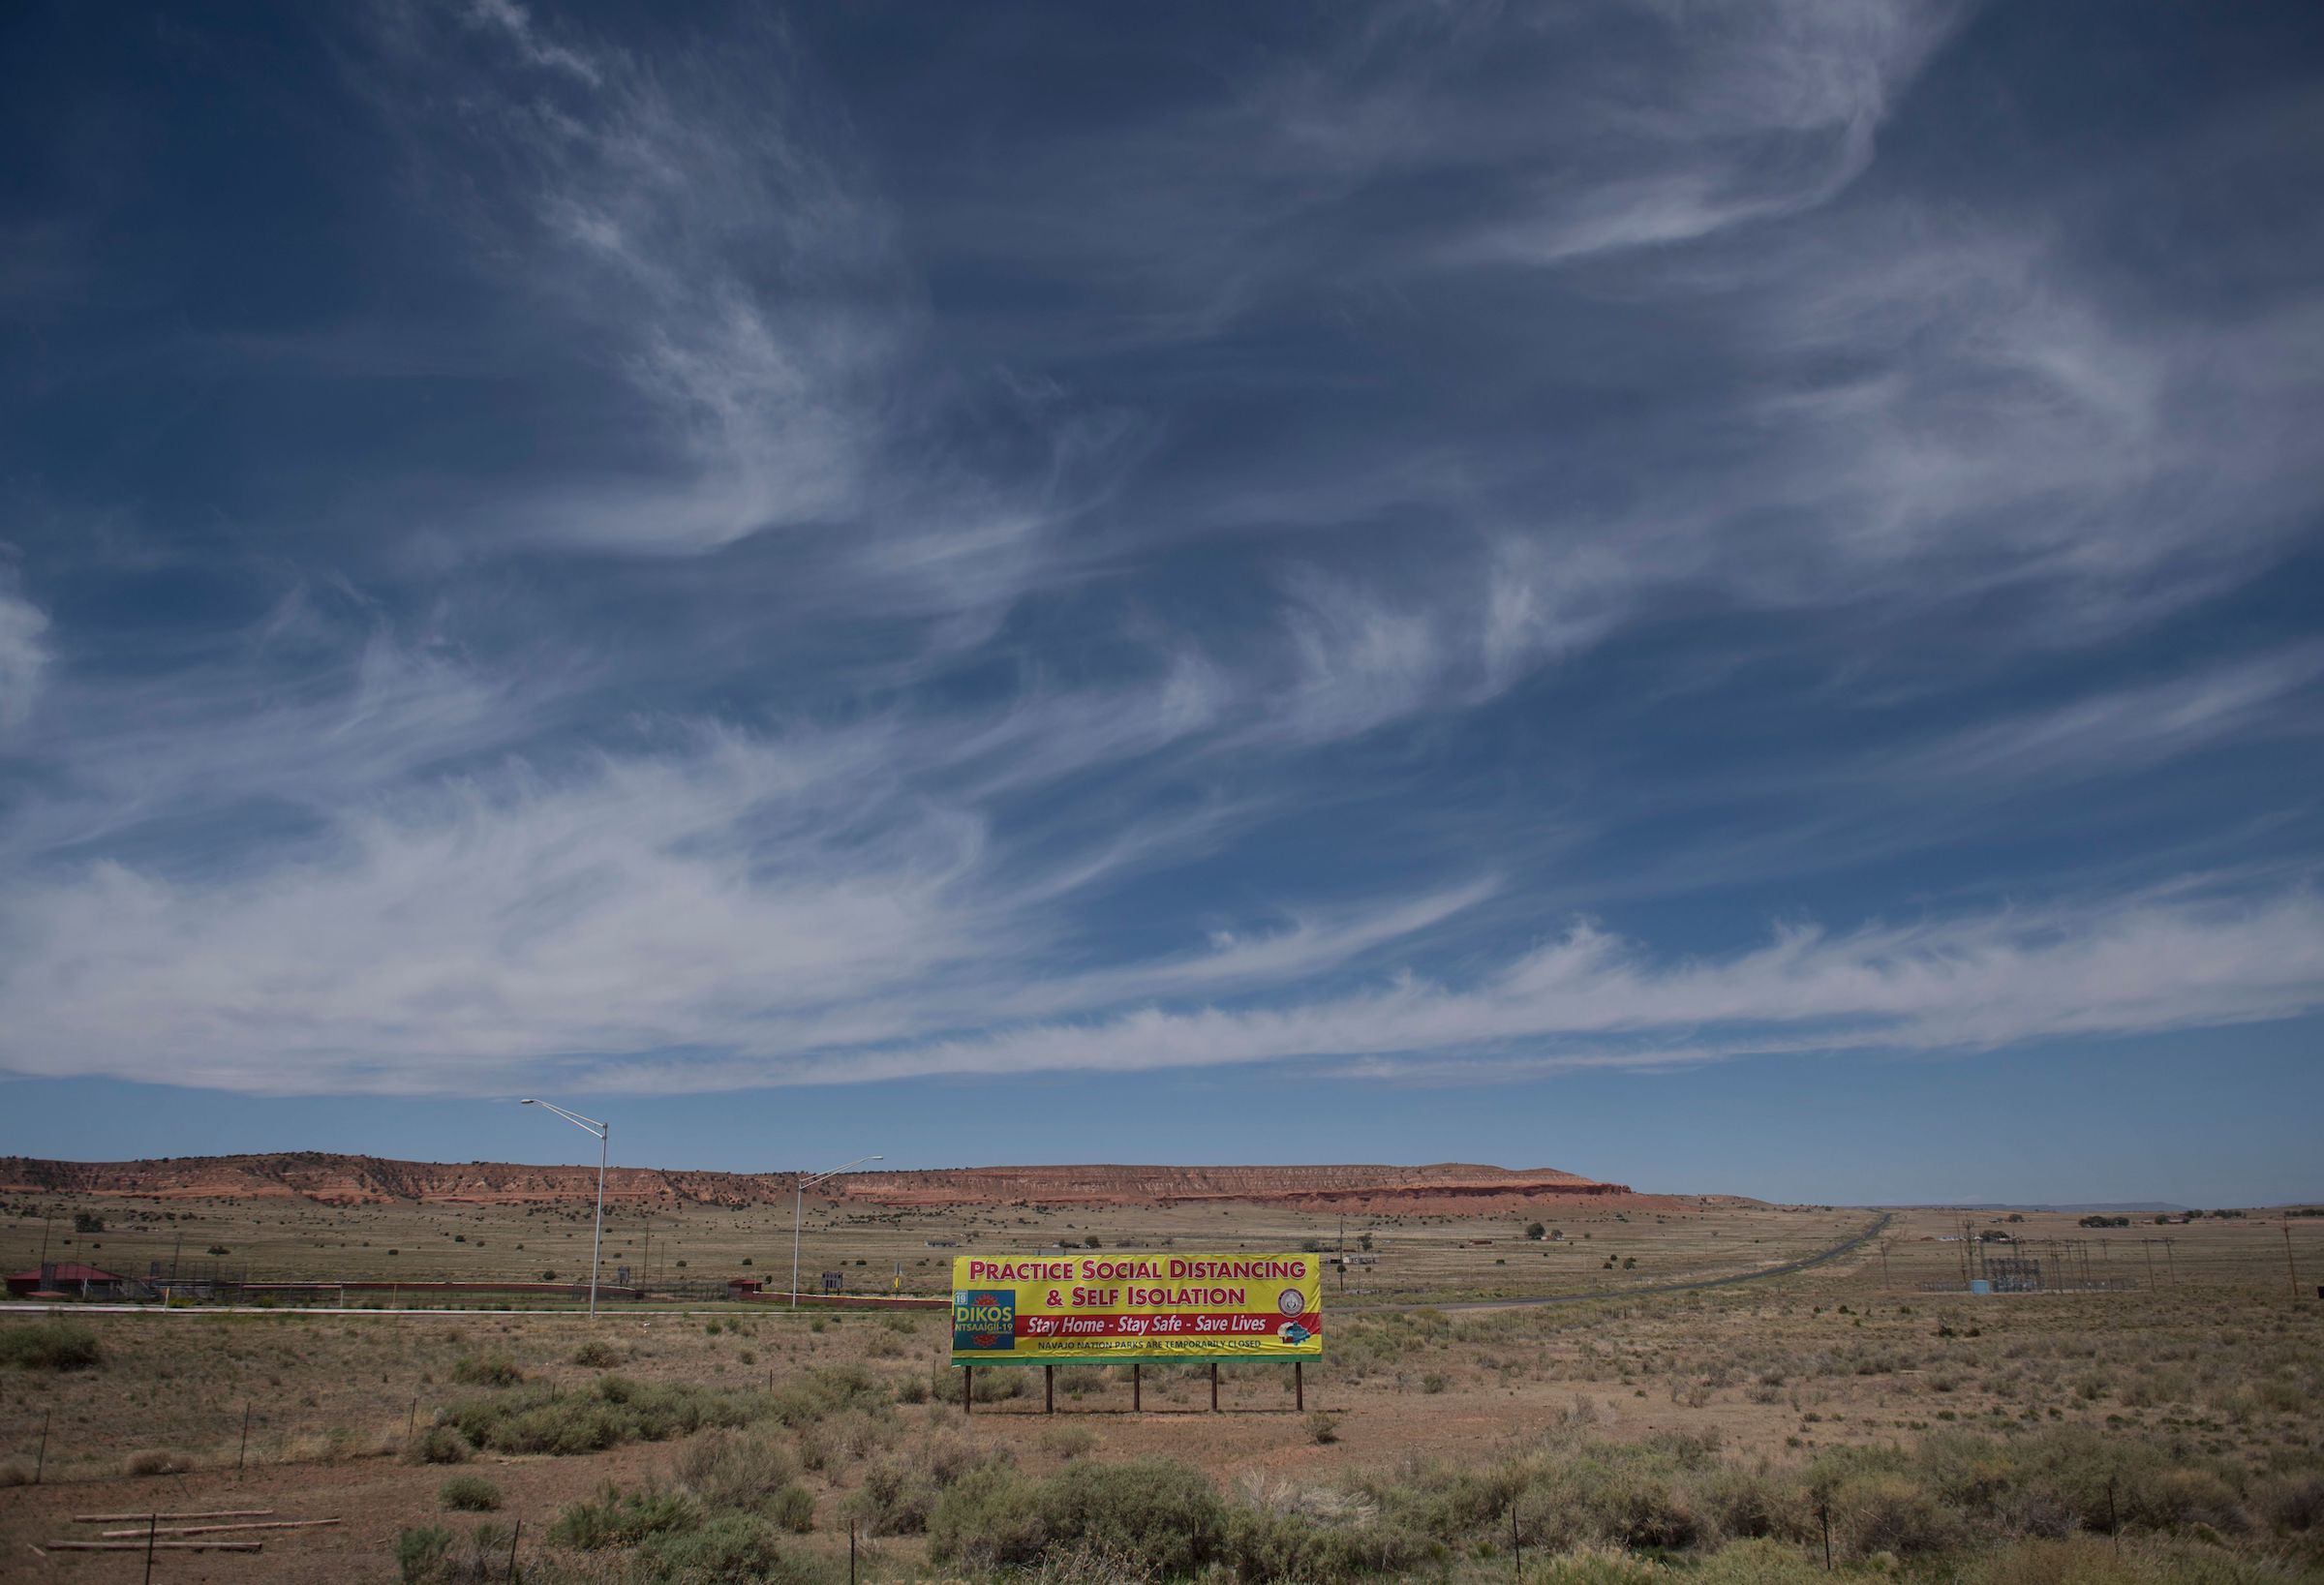 A sign promoting social distancing sits near the Navajo Nation town of Chinle during the 57 hour curfew imposed to try to stop the spread of the Covid-19 virus through the Navajo Nation, in Arizona on May 23, 2020.